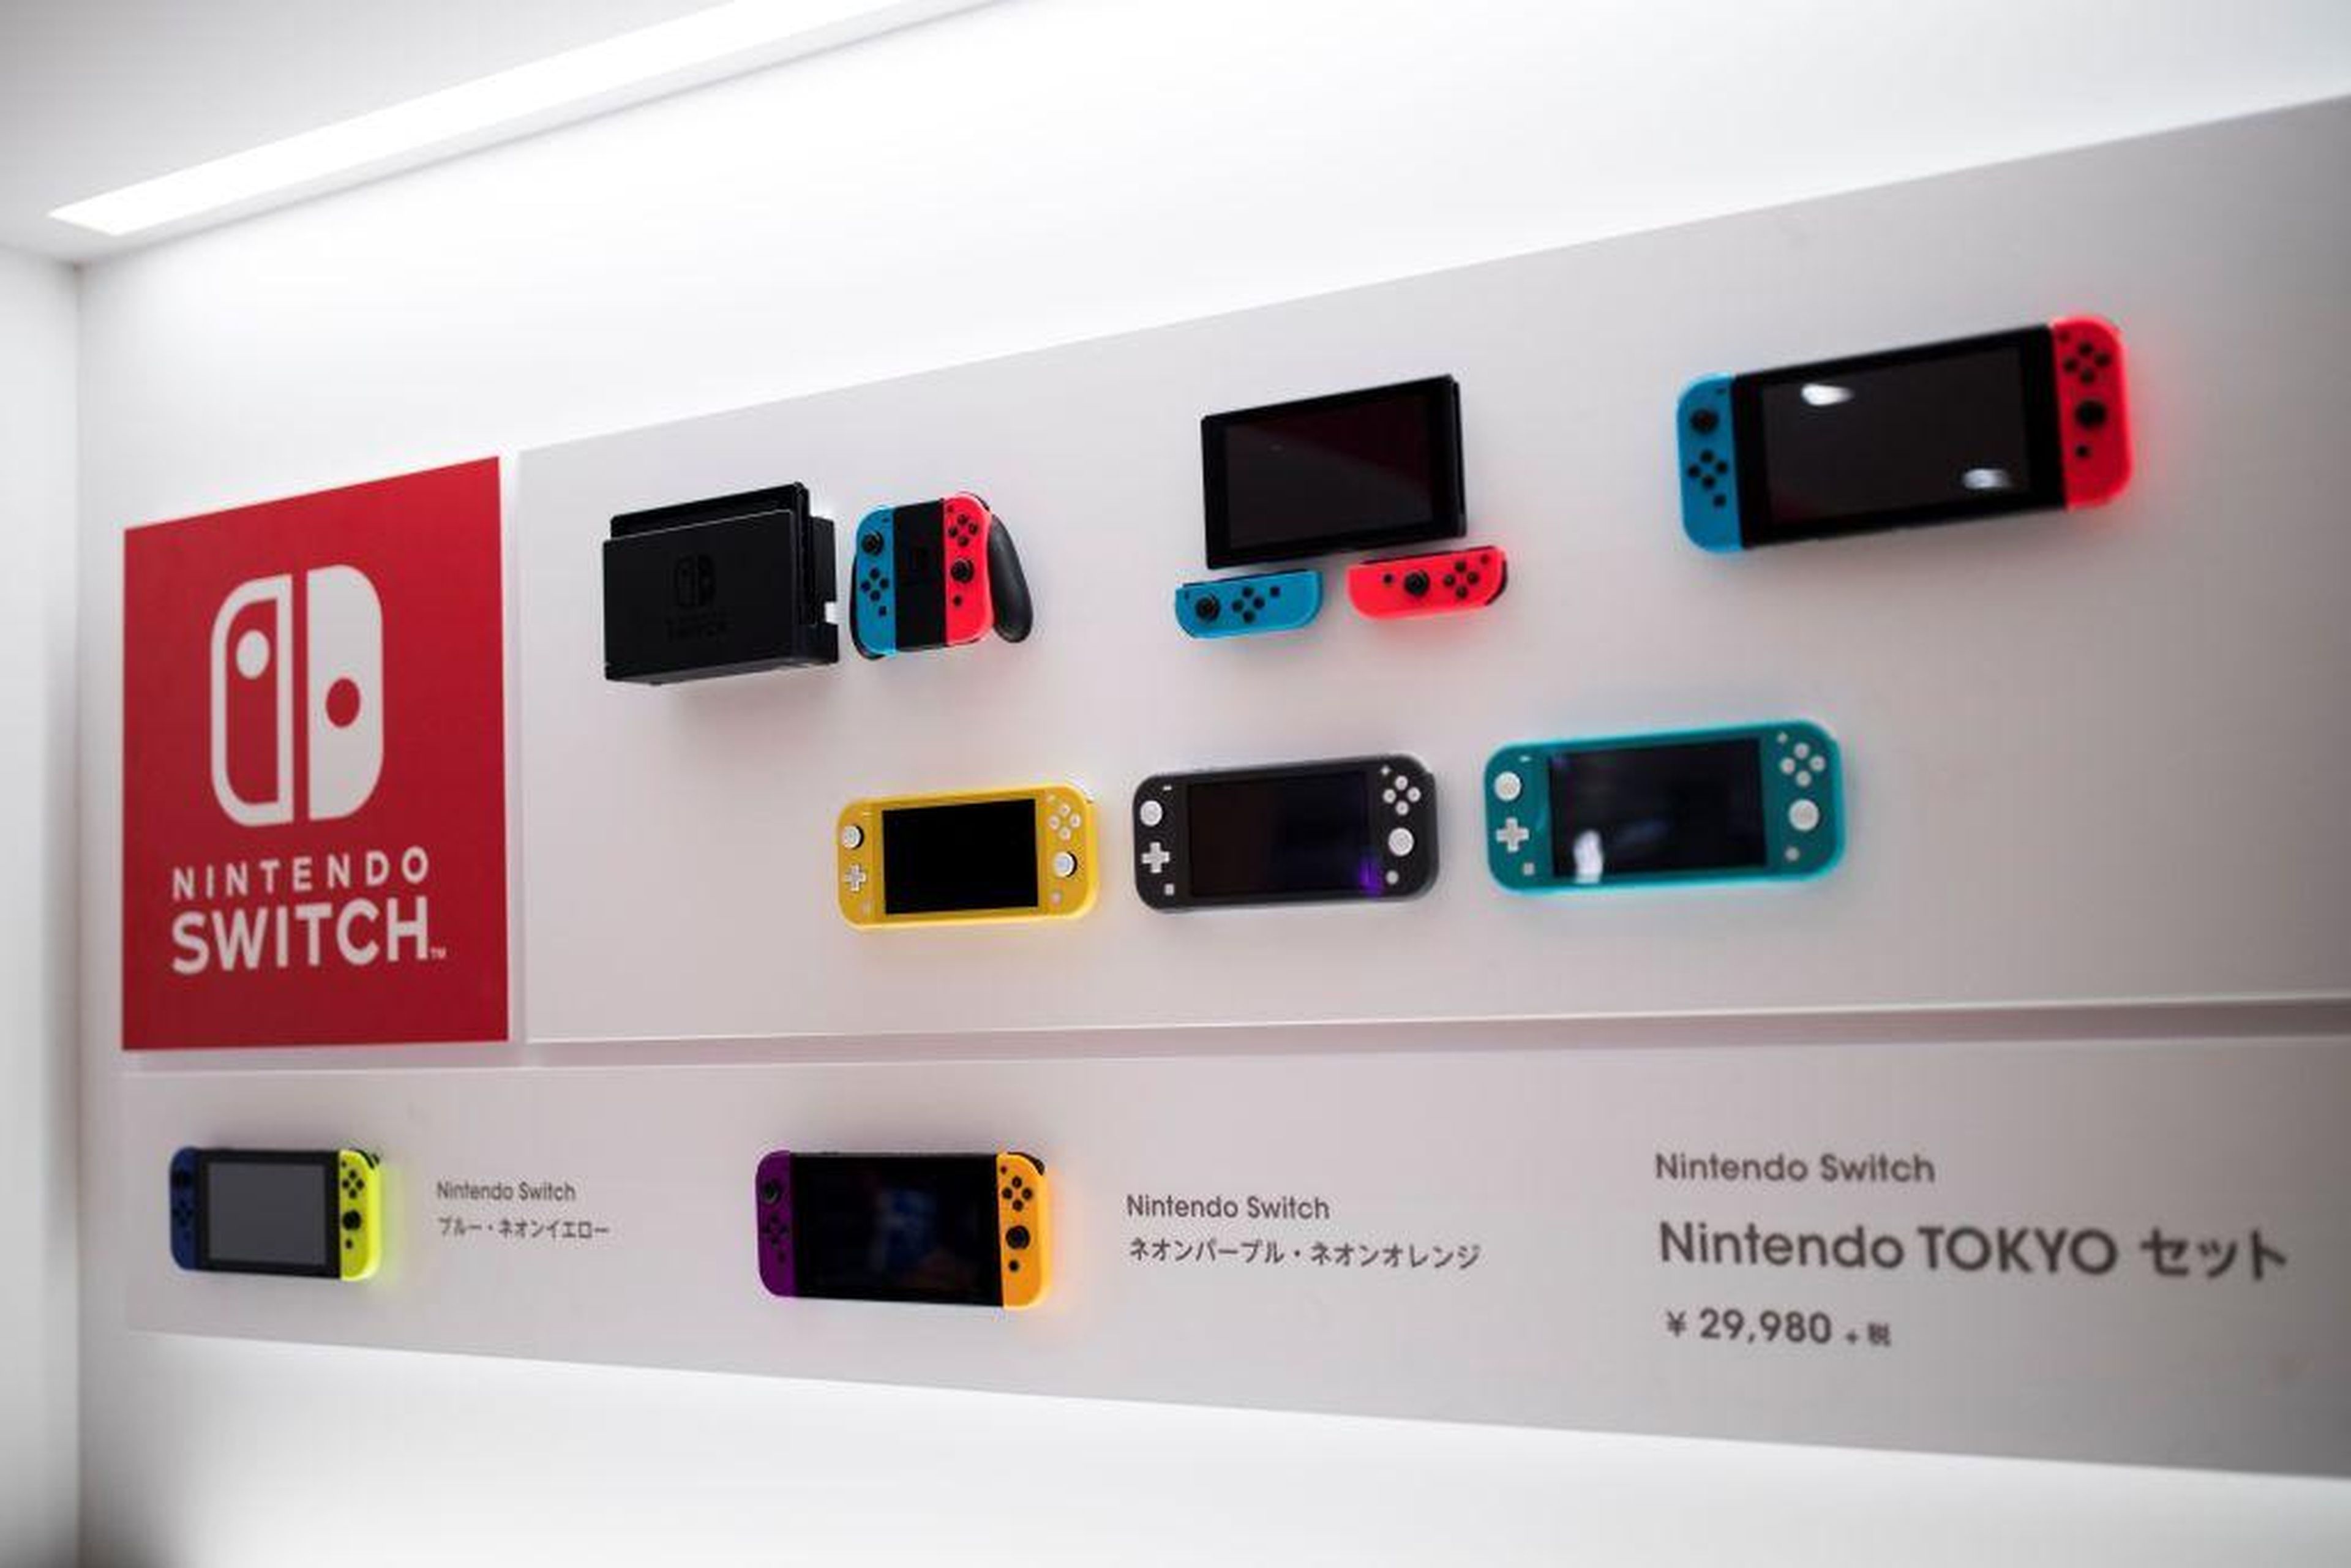 At Nintendo Tokyo, every version of the Switch — the company's newest console — is on display. Customers can also use demo stations to try new Switch games.